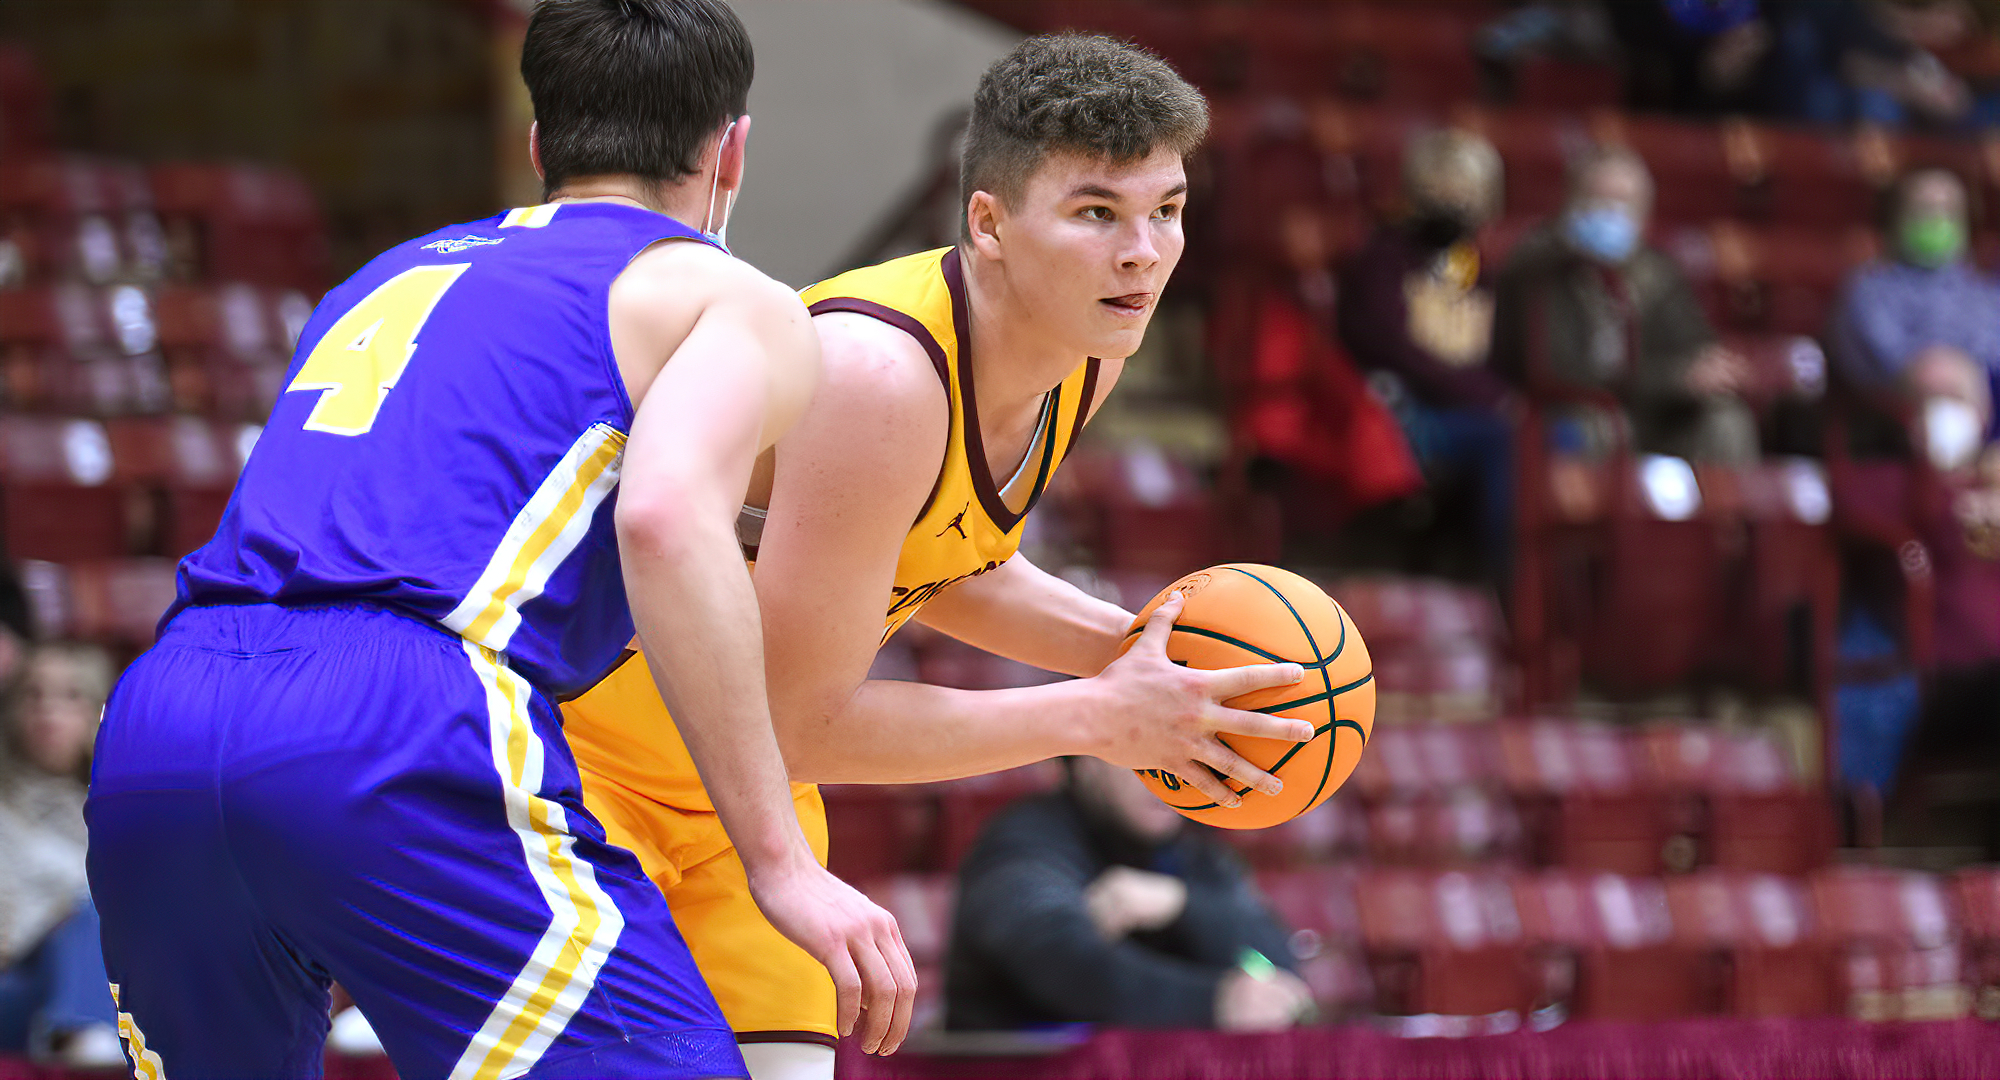 Freshman Rowan Nelson tied his collegiate-best point total by pouring in 25 points in the Cobbers' game at Macalester.